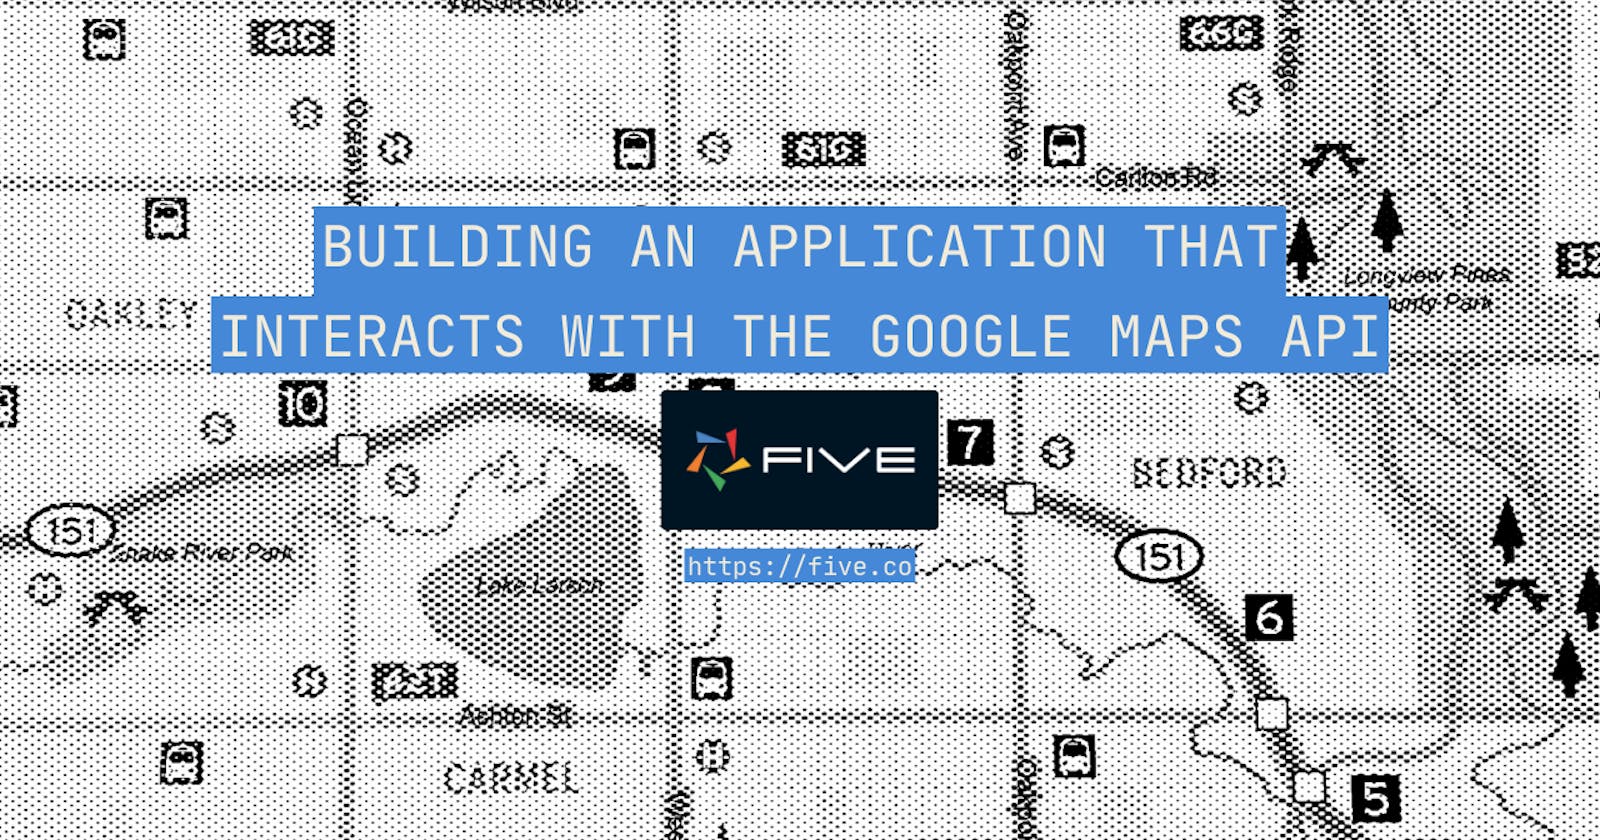 Building an Application That Interacts with the Google Maps API